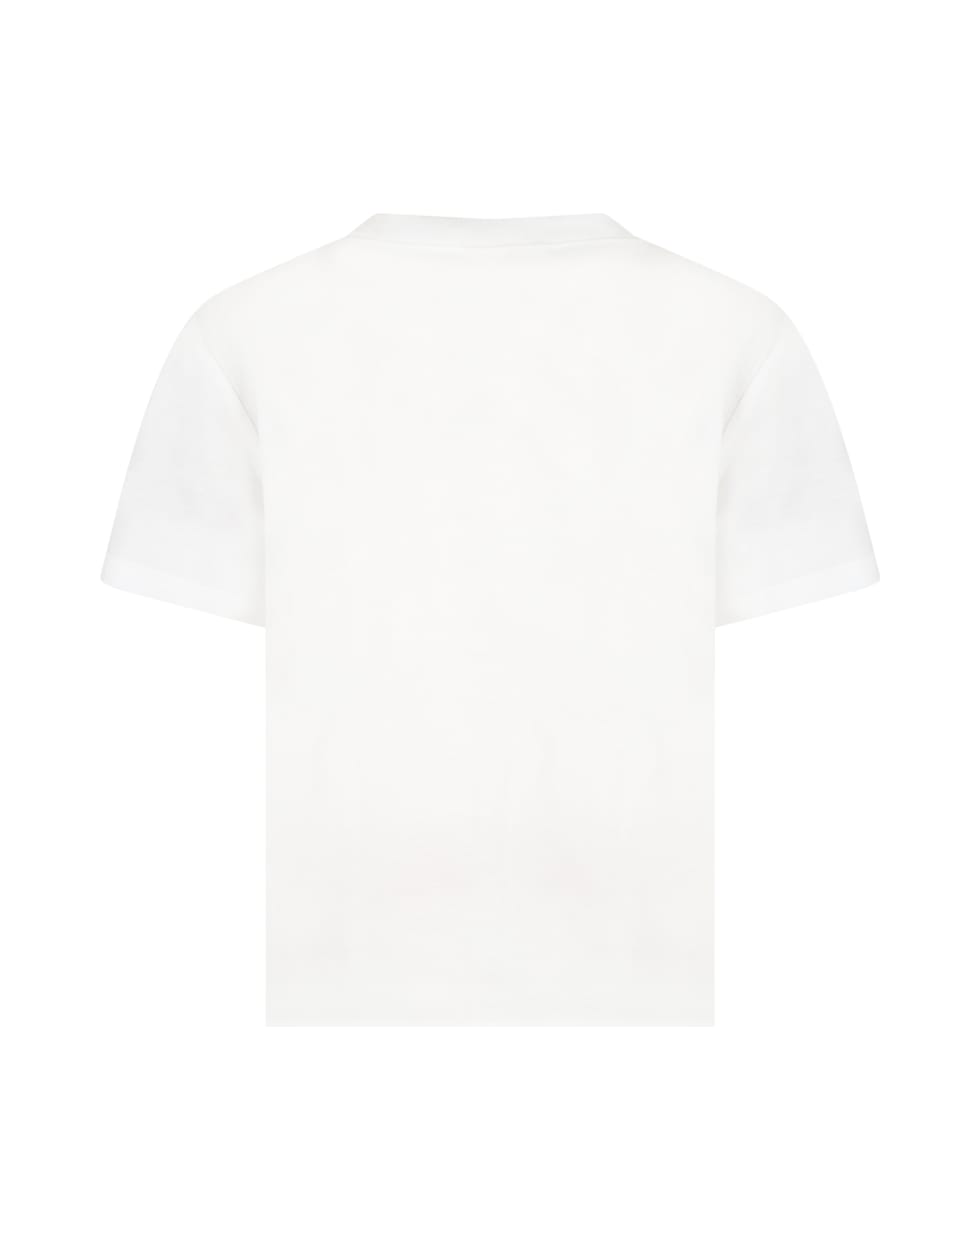 Gucci White T-shirt For Kids With Cherry - White Multicolor